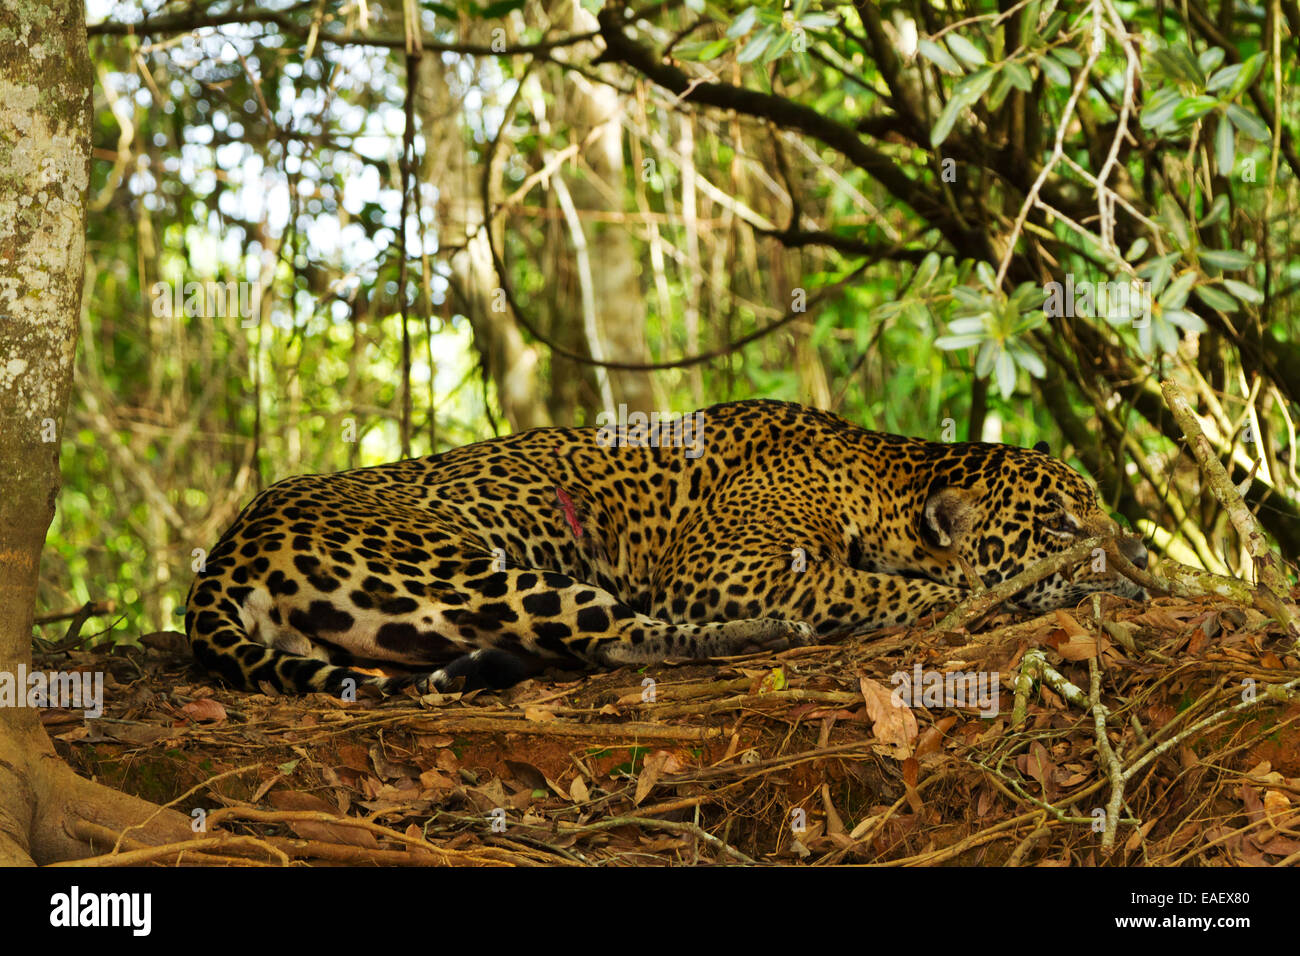 Jaguar (Panthera onca) with a big flesh wound after a fight with another jaguar in the Pantanal wetlands in Brazil. Stock Photo